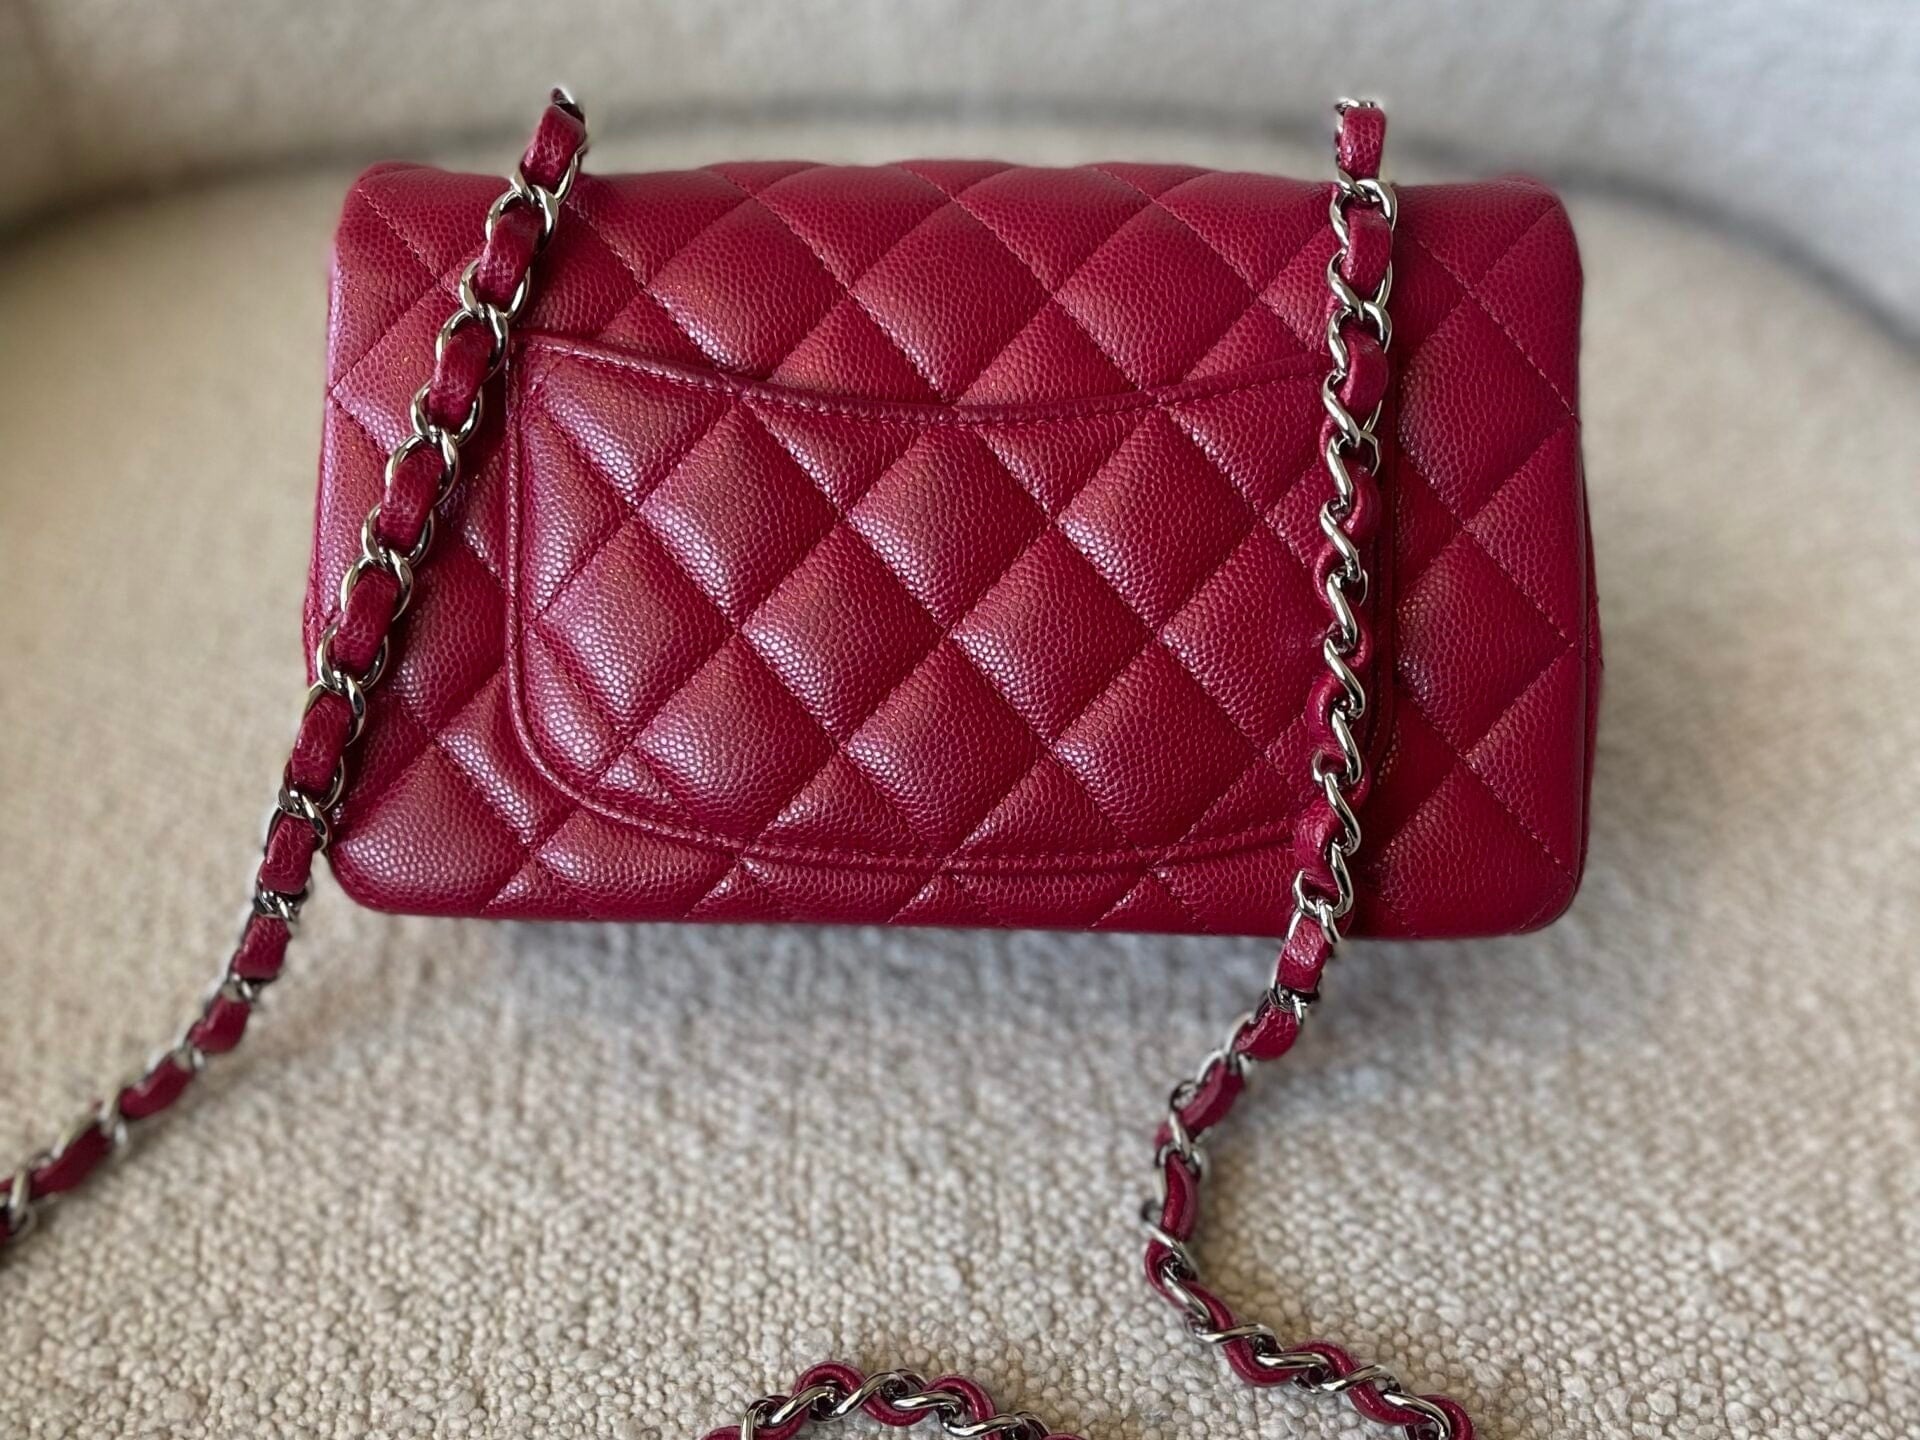 CHANEL Handbag 18B Raspberry Red Caviar Quilted Mini Rectangular Single Flap with Light Gold Hardware - Redeluxe